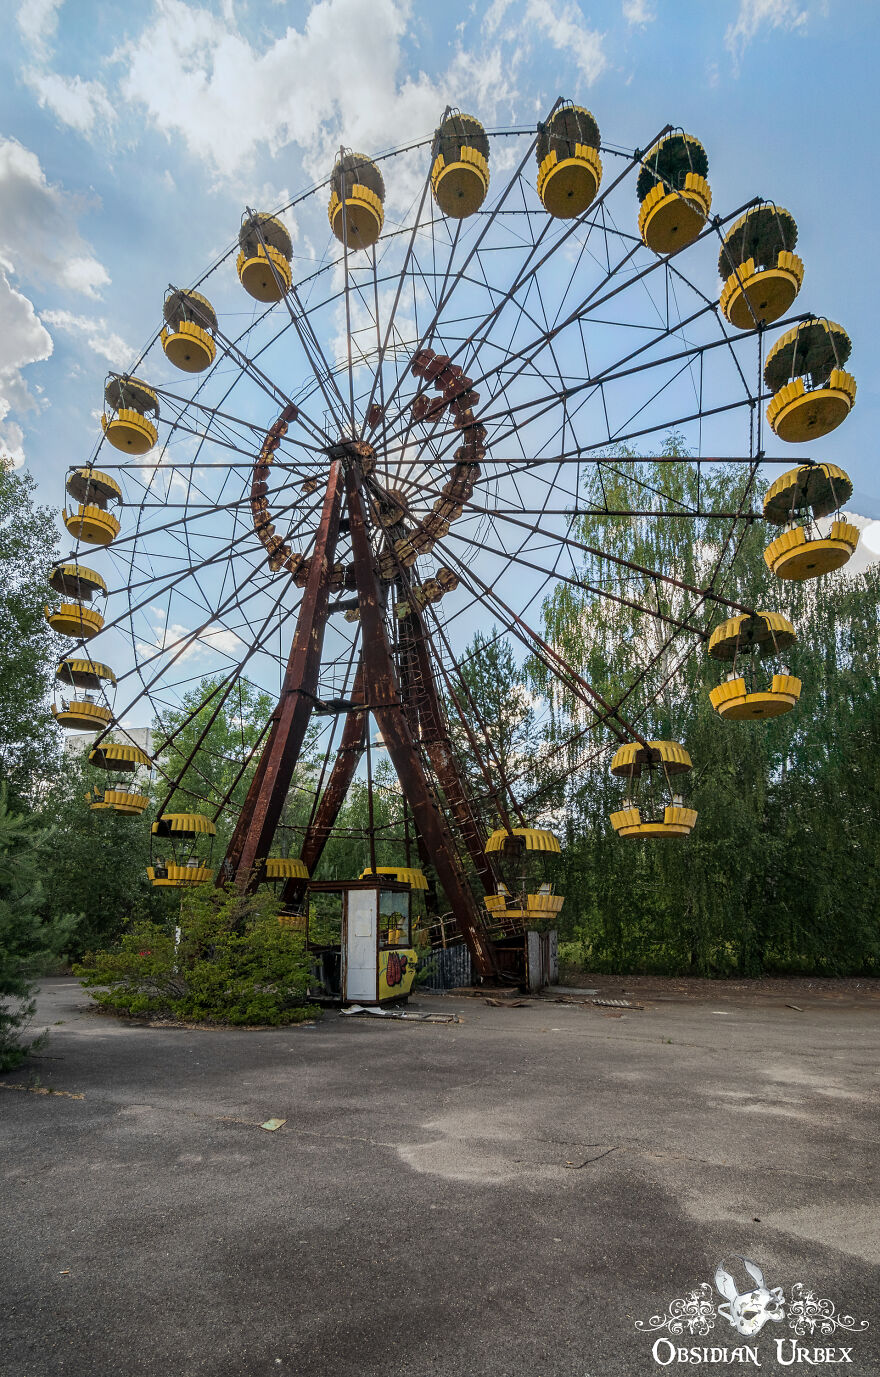 The Ferris Wheel At The Abandoned Amusement Park